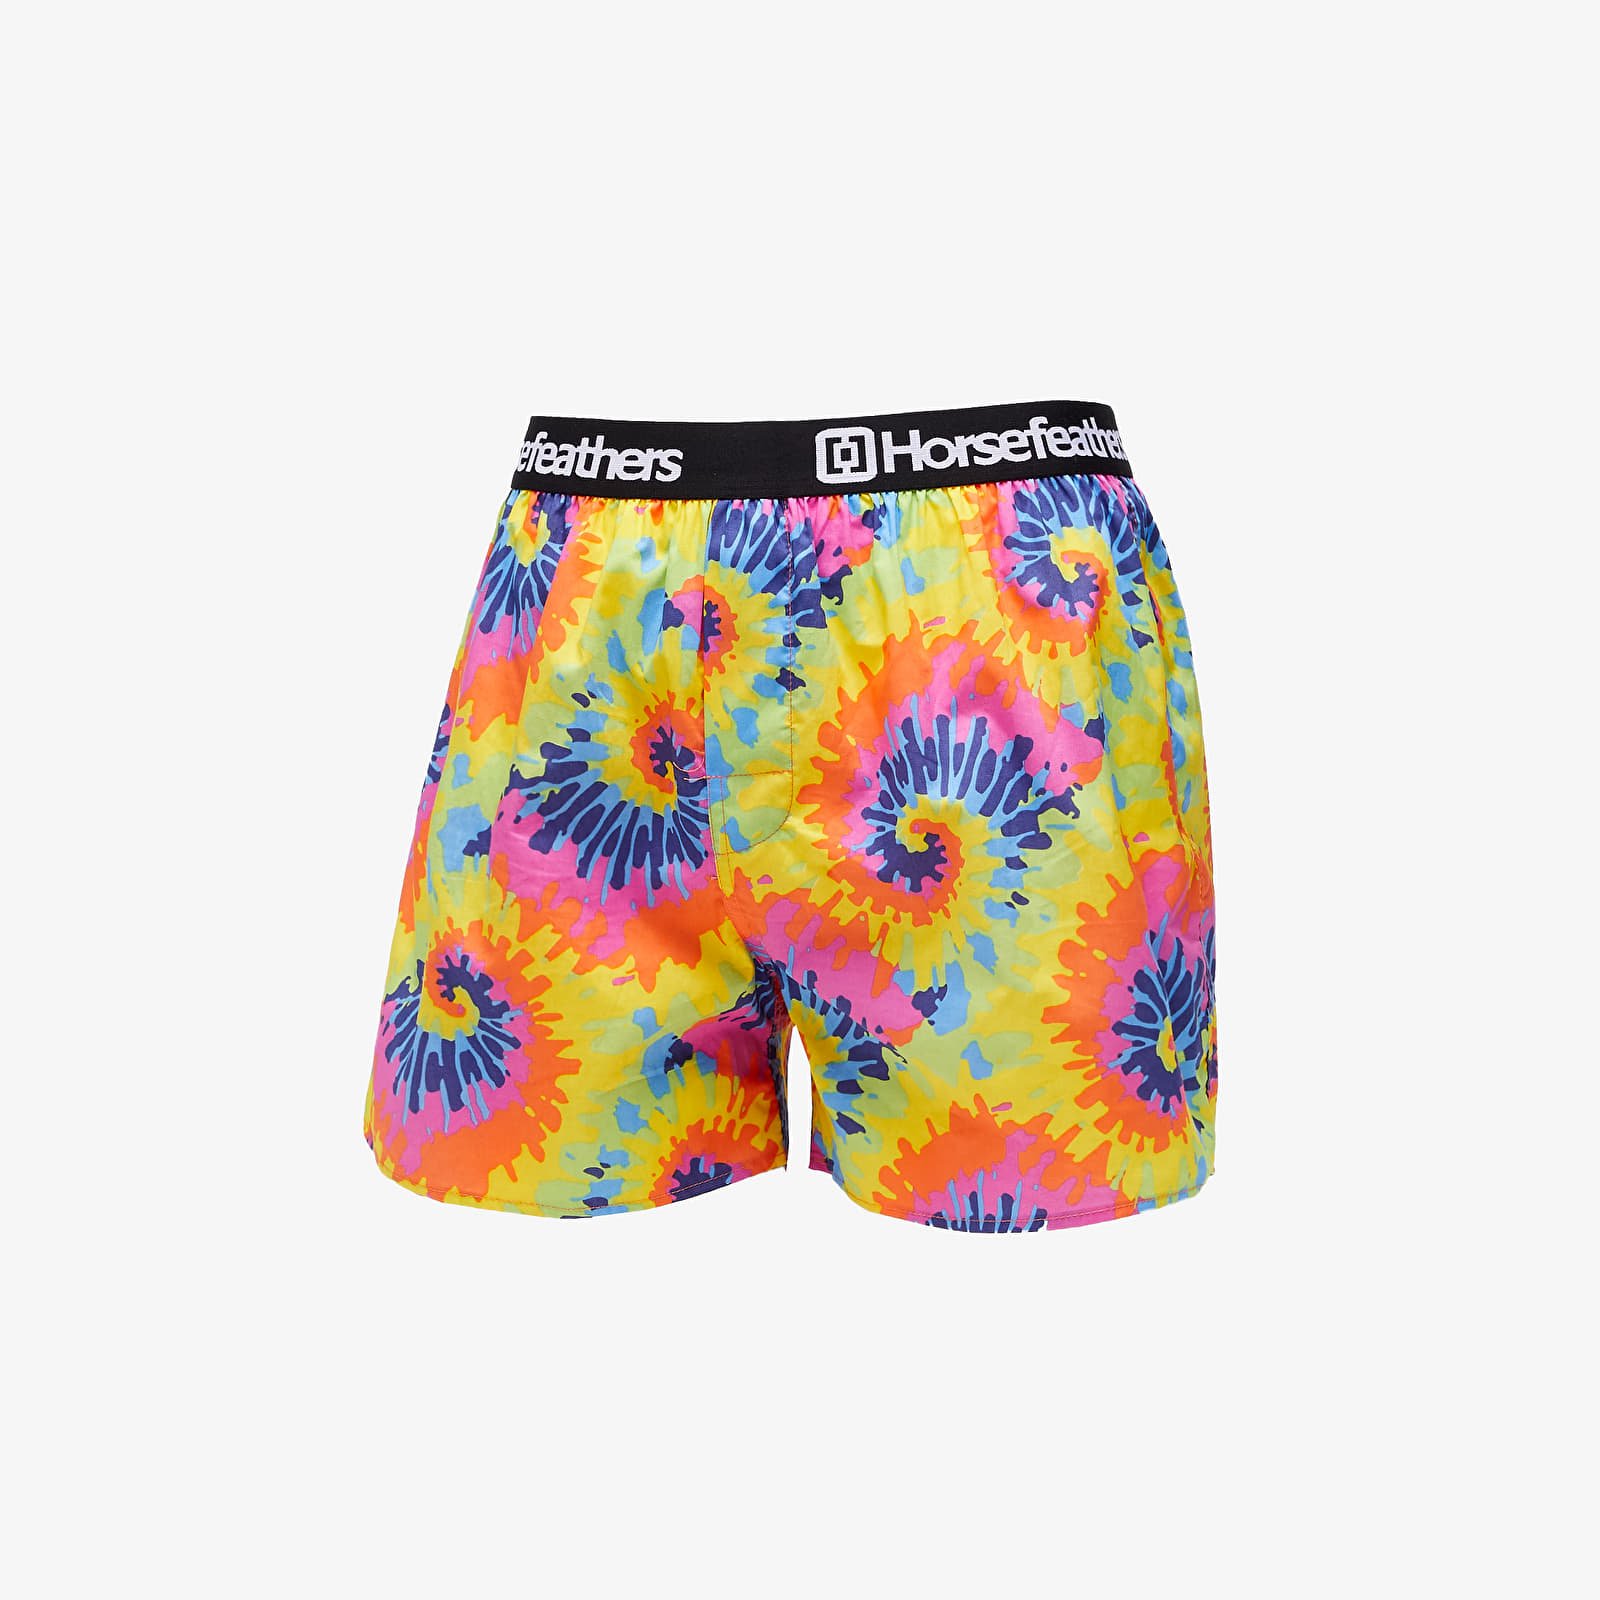 Trunks Horsefeathers Frazier Boxer Shorts Tie Dye